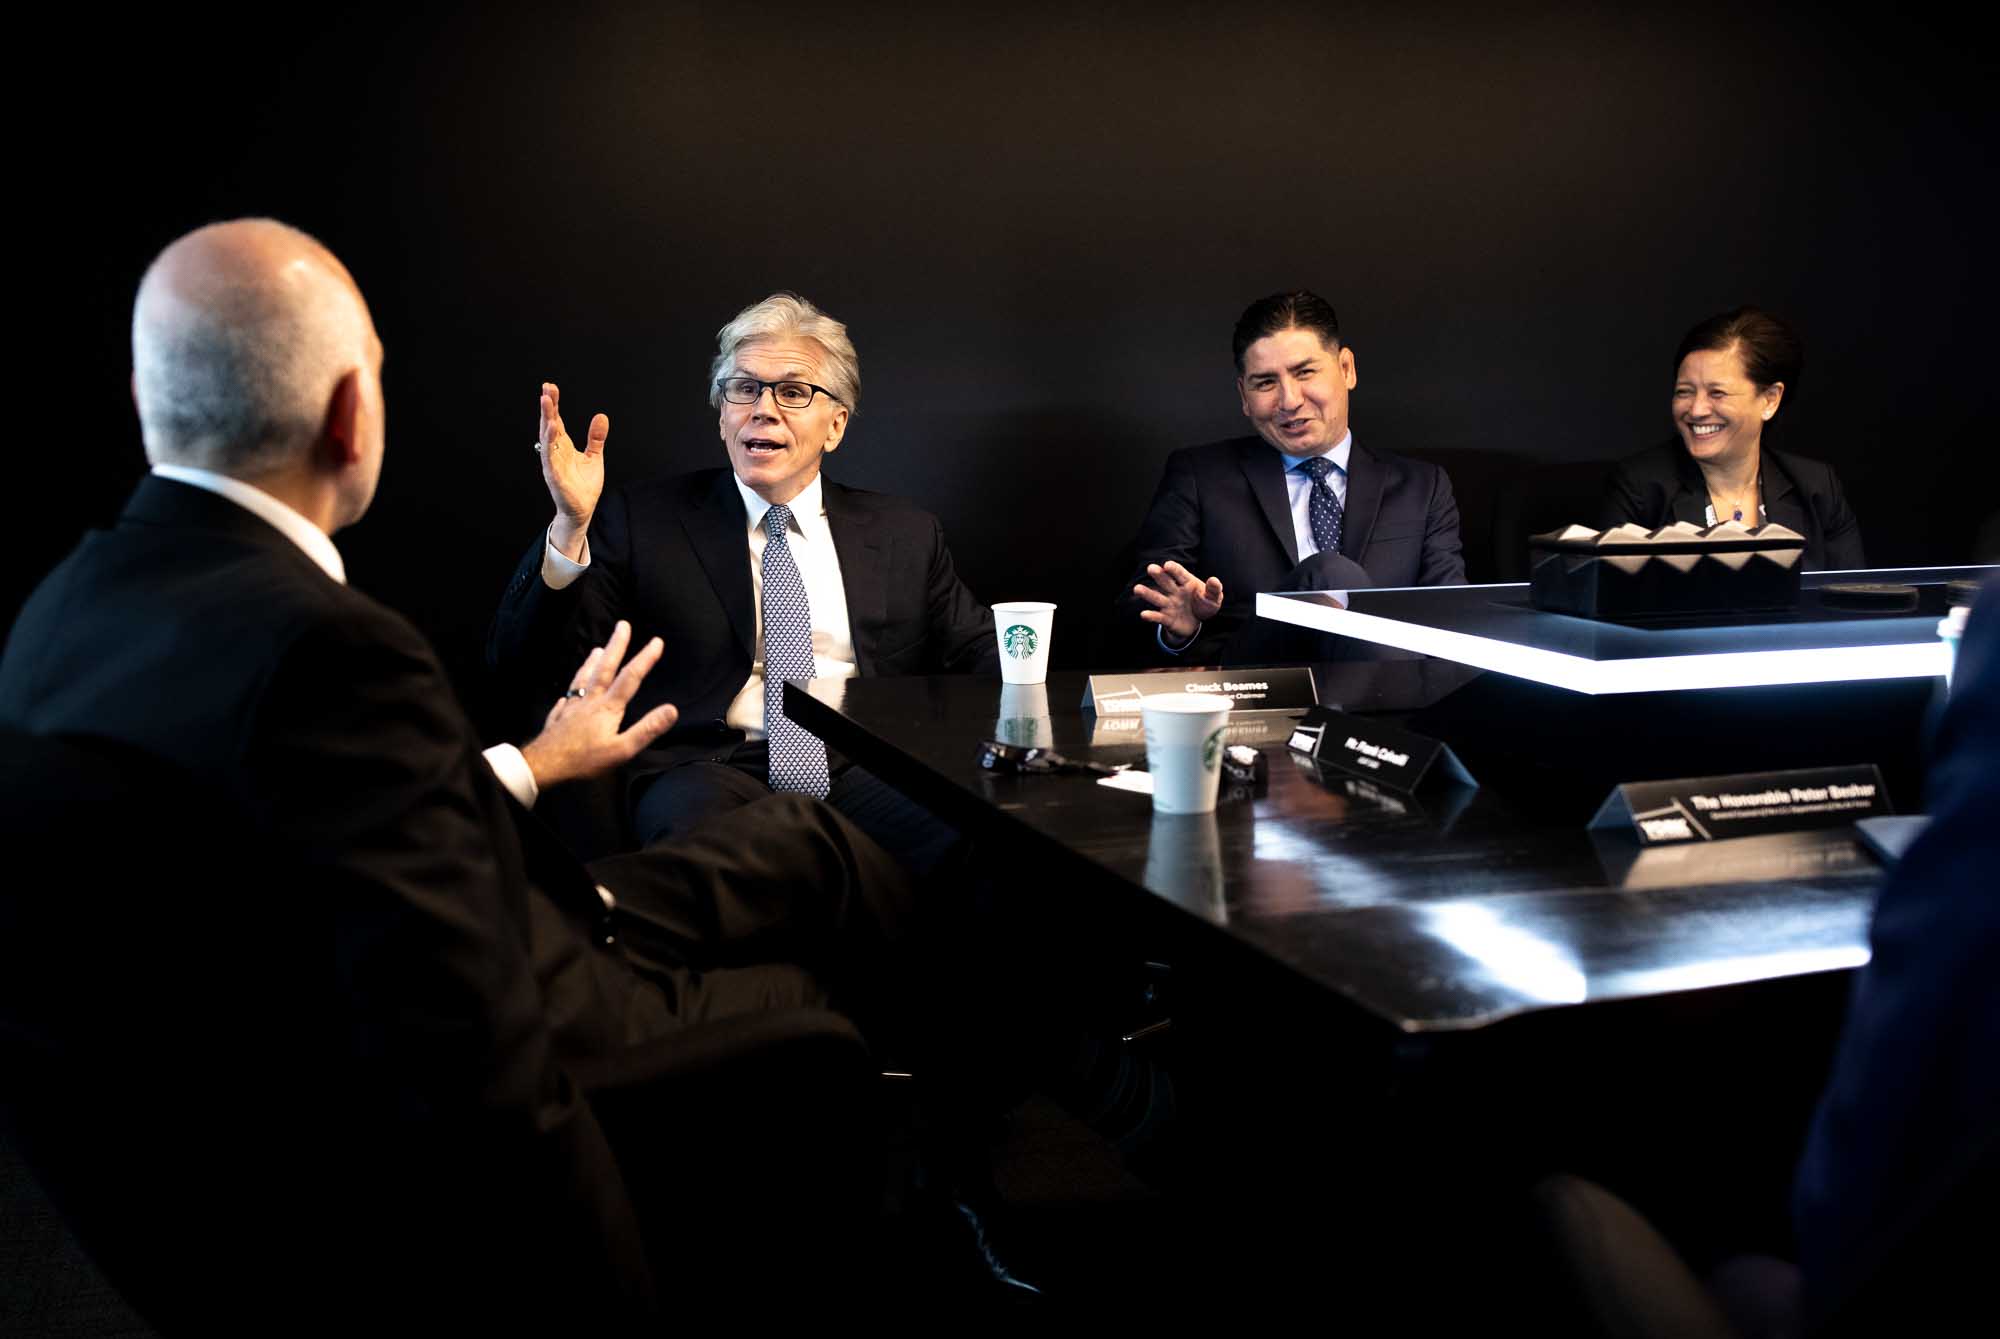 Businessmen having an animated discussion during corporate meeting